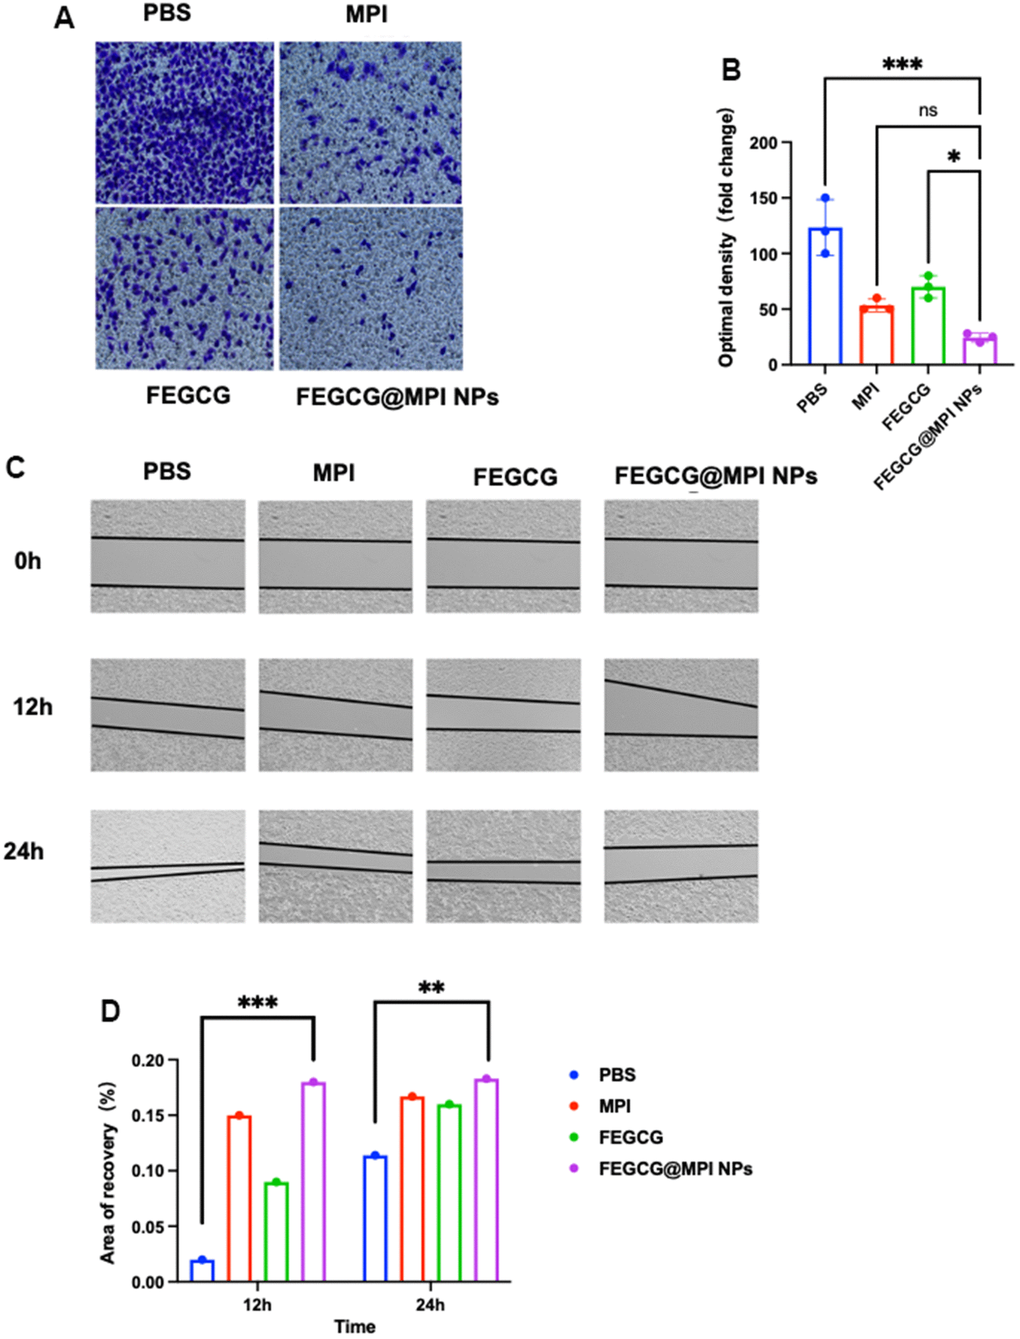 Effect of FEGCG@MPI NPs on invasion and migration of Hep 3B cells. (A) Invasion of Hep3B cells treated with PBS, MPI, FEGCG, FEGCG@MPI NPs. The FEGCG@MPI NPs group had significantly less cell migration than the PBS, MPI and FEGCG groups. (B) Data are presented as the mean ± standard deviation. *P C) Scratch of Hep3B cells treated with PBS, FEGCG, MPI, FEGCG@MPI NPs for 0, 12 and 24 hours respectively. (D) Data are presented as the mean ± standard deviation. *P 